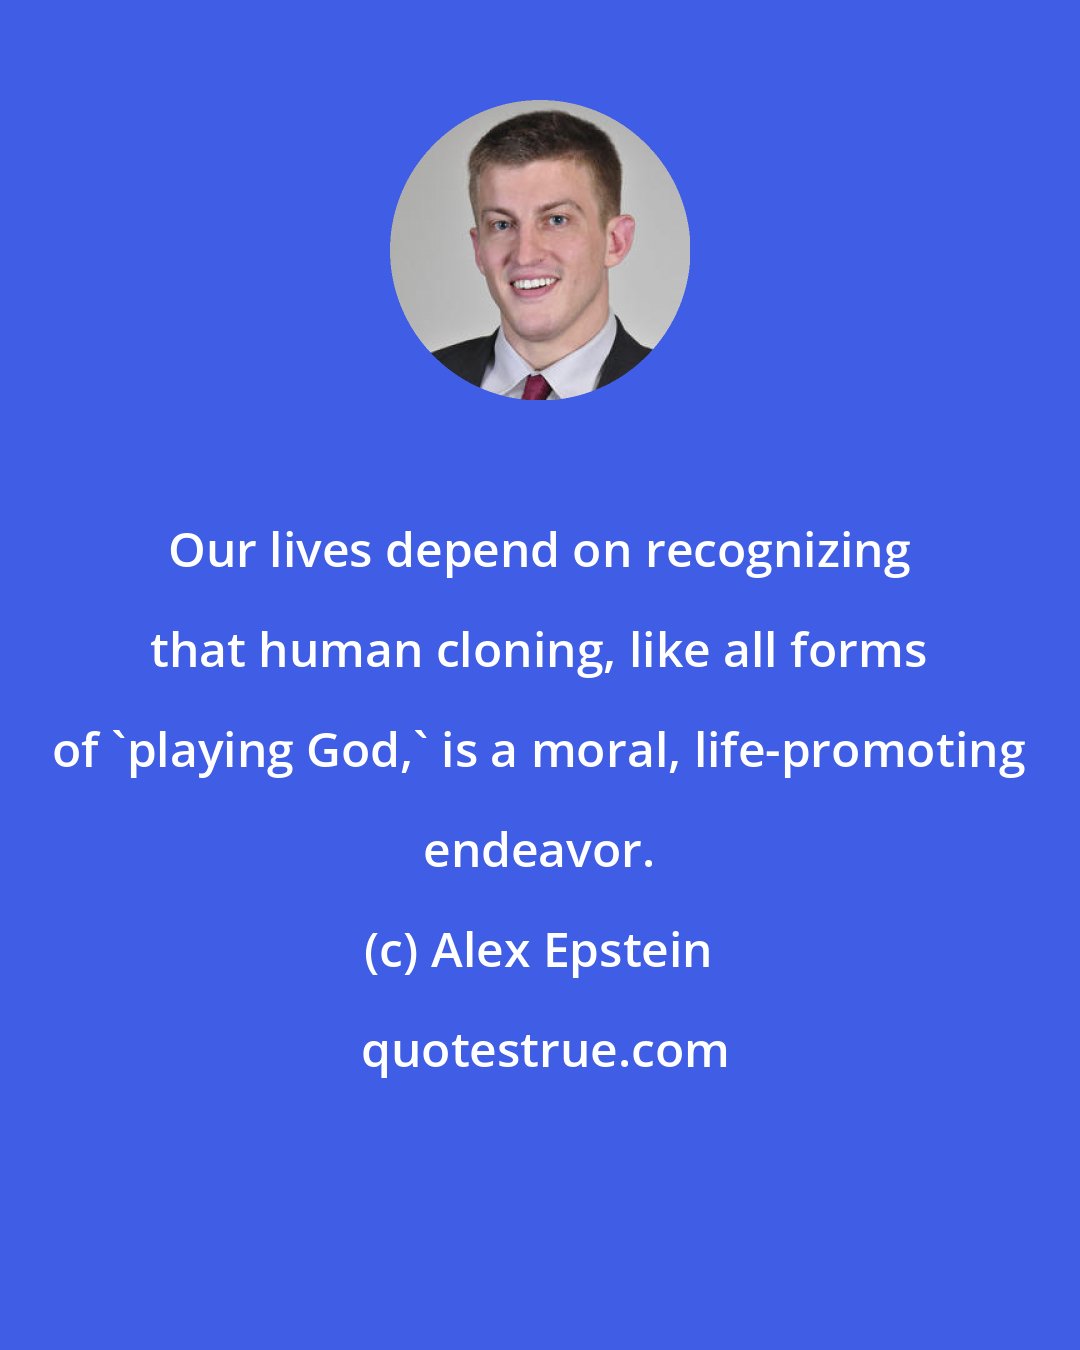 Alex Epstein: Our lives depend on recognizing that human cloning, like all forms of 'playing God,' is a moral, life-promoting endeavor.